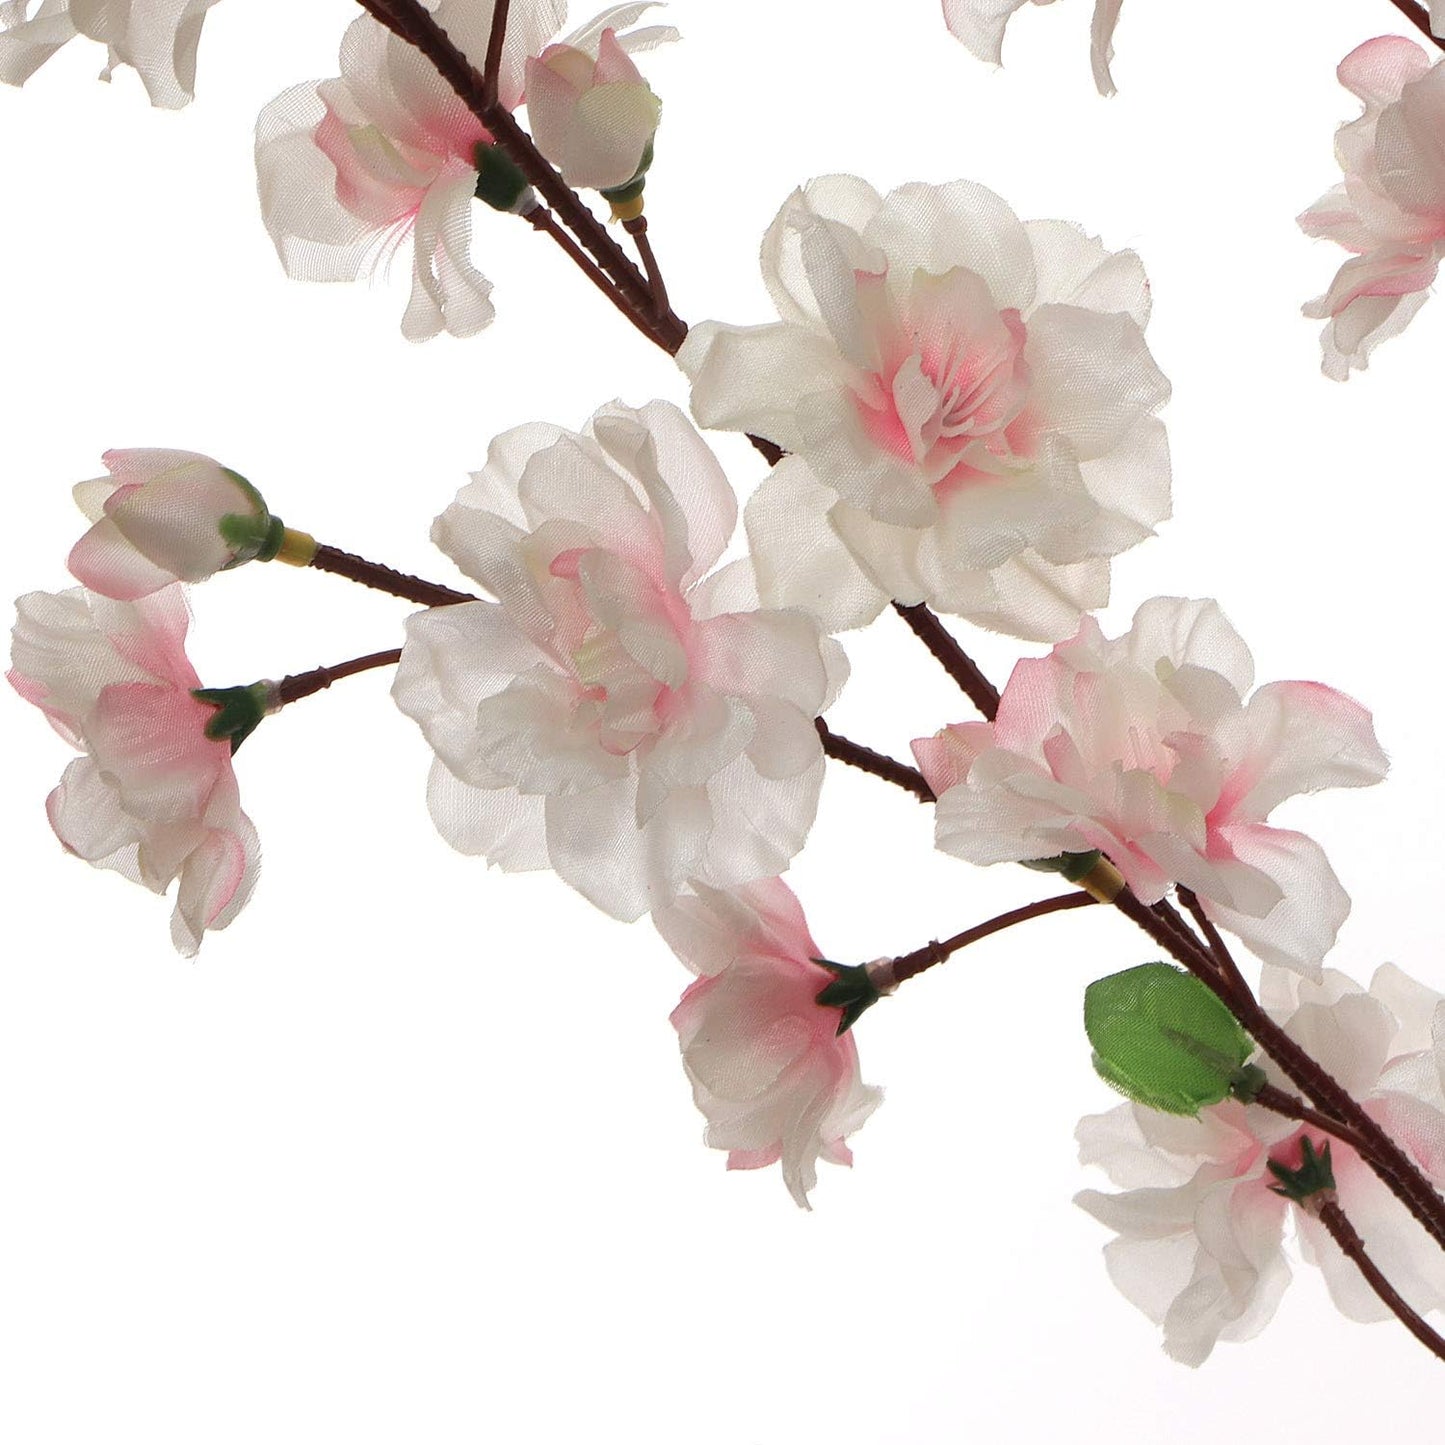 Pink Cherry Blossom Flowers, Three 36 Inch Blossom Branches, Wedding, Party, Event, Décor, Japan's National Flower